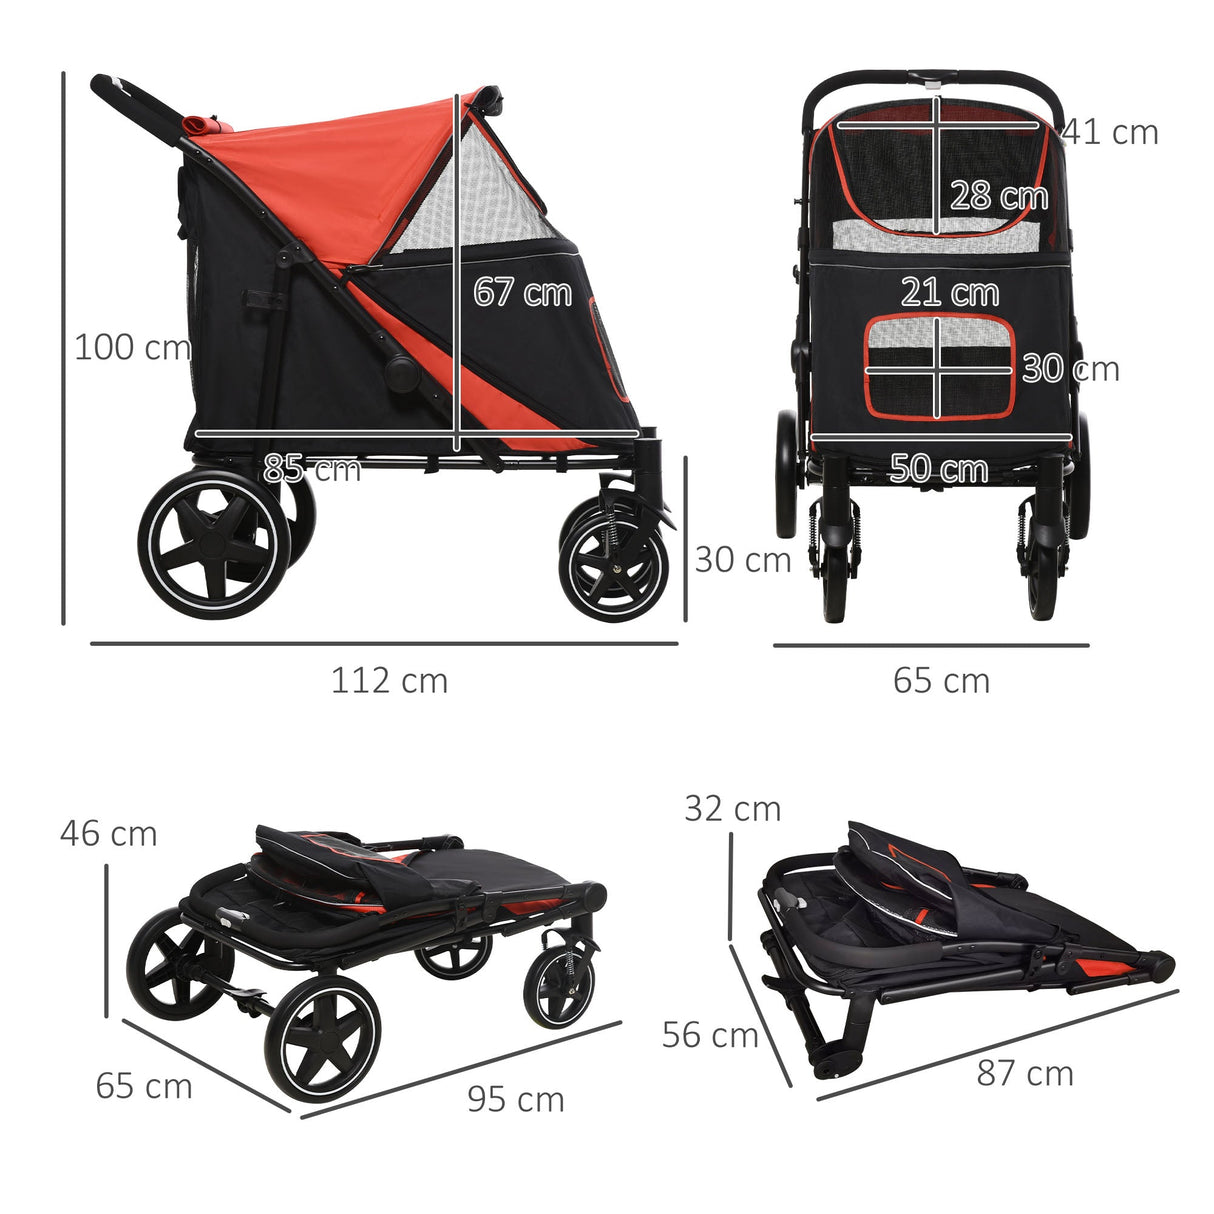 Foldable Pet Stroller for Medium/Large Dogs | Easy Storage - Red, PawHut, Red